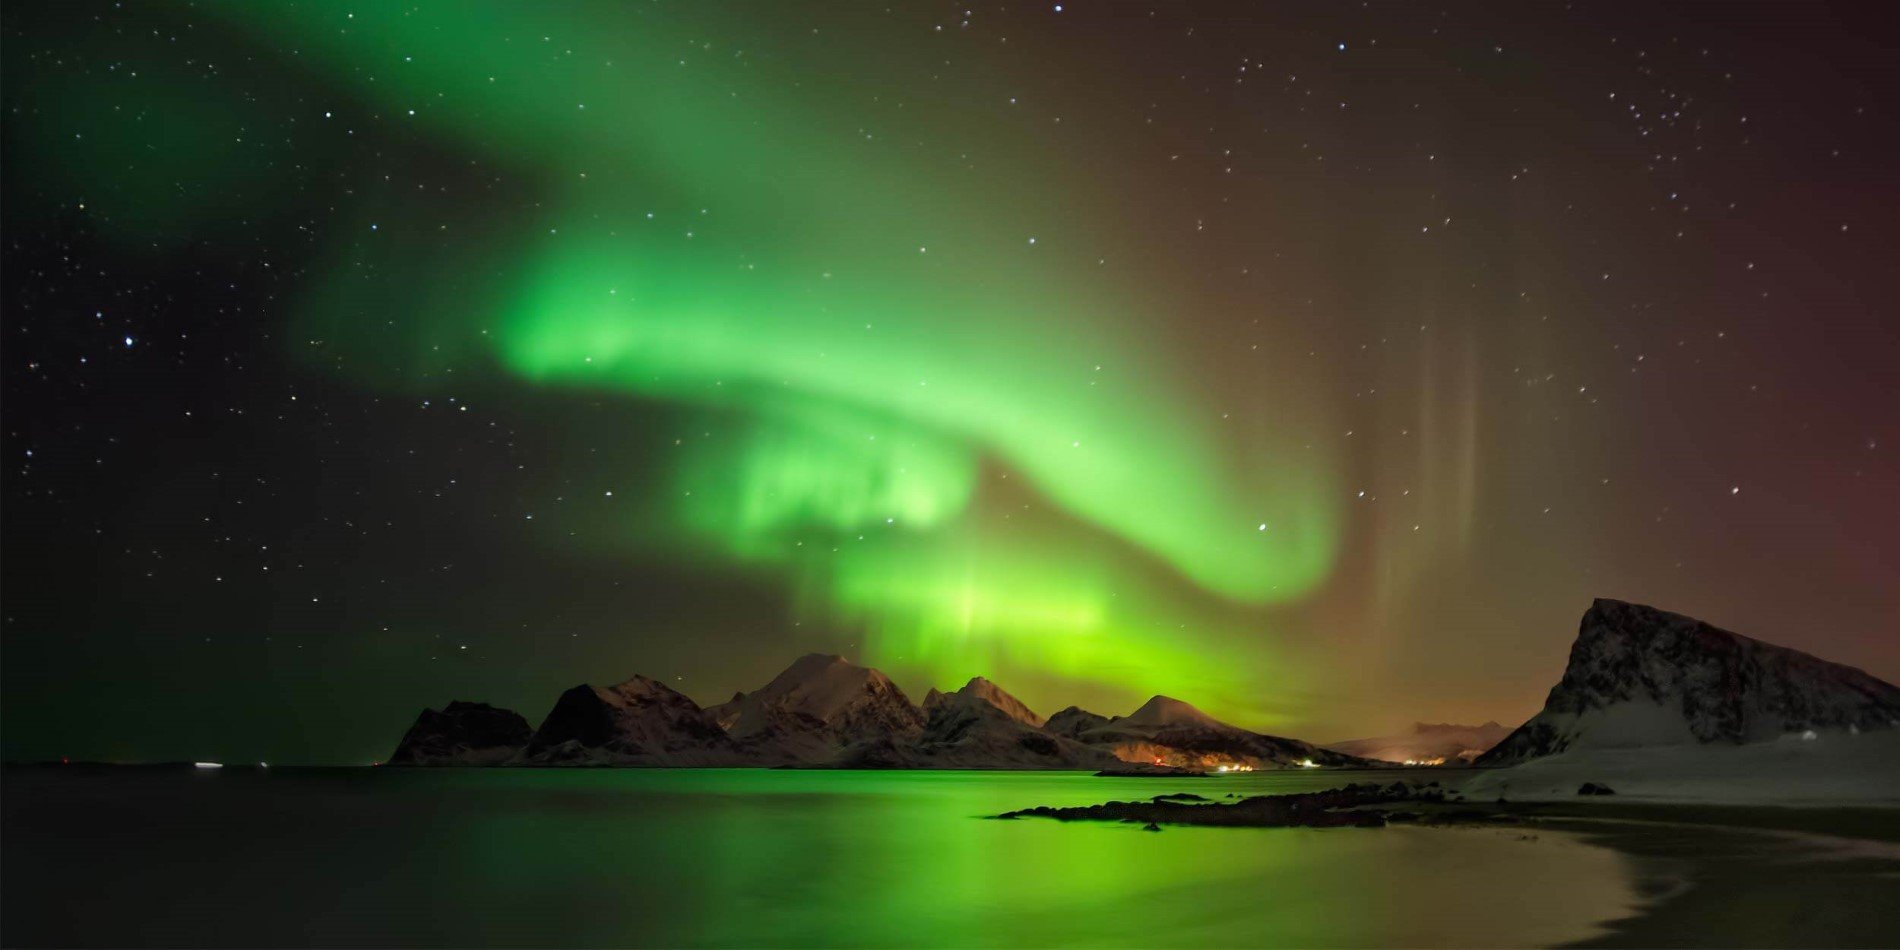 The Northern Lights: Frequently Asked